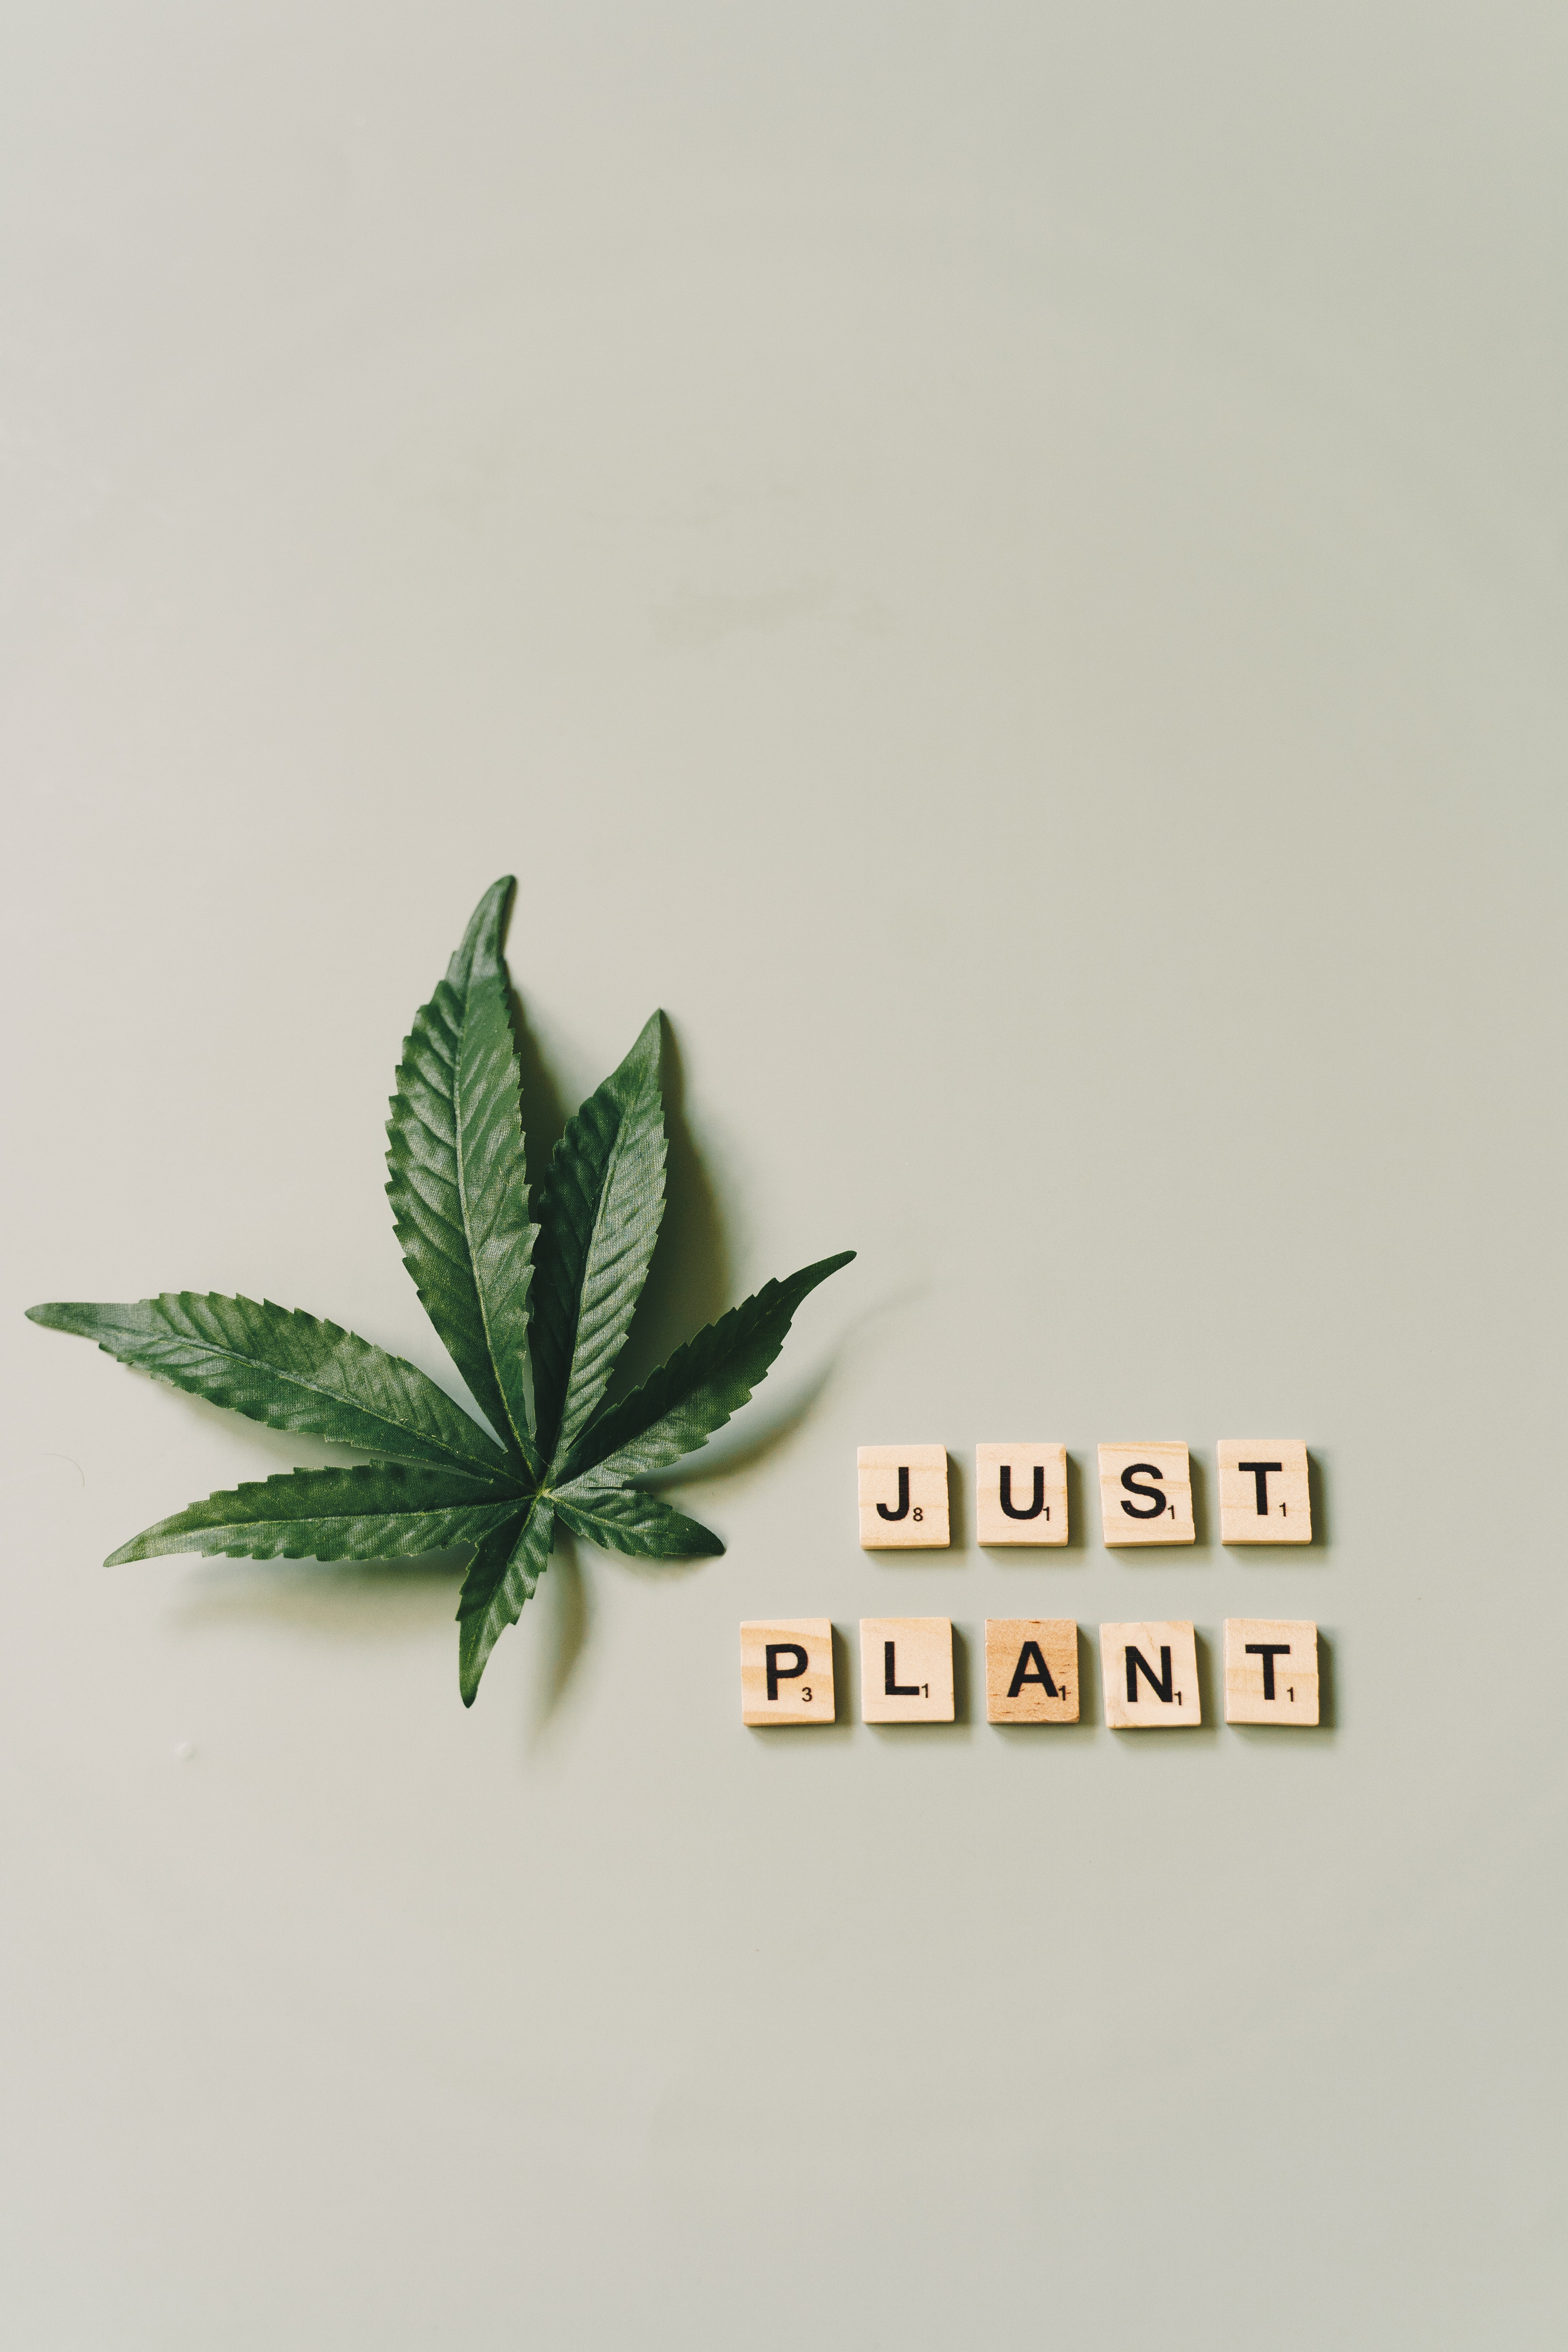 A single cannabis leaf next to letter tiles spelling out 'JUST PLANT' on a plain background, representing the shift in perception and legal status of marijuana following Proposition 207 in Arizona.